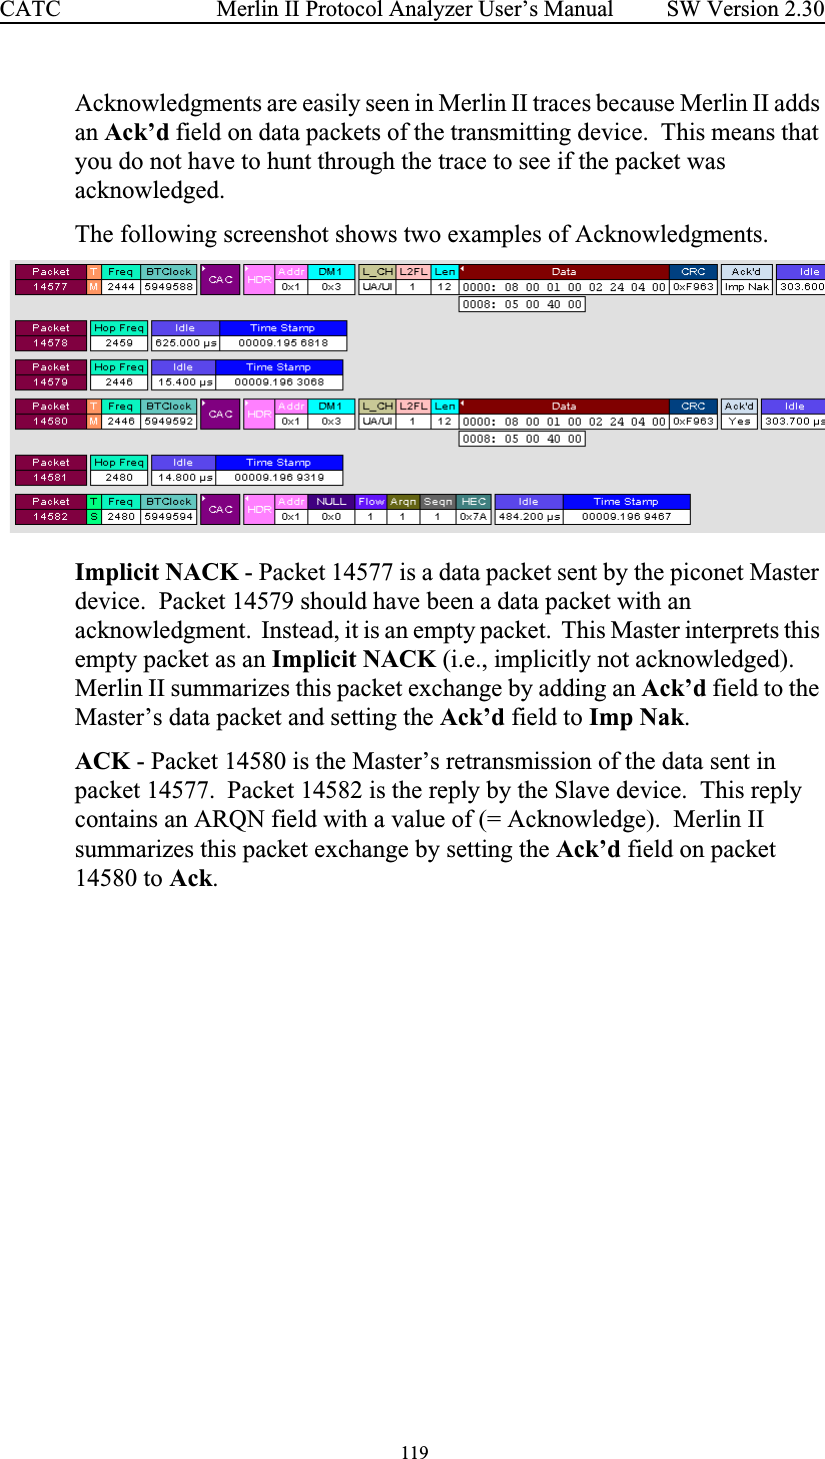  119 Merlin II Protocol Analyzer User’s ManualCATC SW Version 2.30Acknowledgments are easily seen in Merlin II traces because Merlin II adds an Ack’d field on data packets of the transmitting device.  This means that you do not have to hunt through the trace to see if the packet was acknowledged. The following screenshot shows two examples of Acknowledgments.  Implicit NACK - Packet 14577 is a data packet sent by the piconet Master device.  Packet 14579 should have been a data packet with an acknowledgment.  Instead, it is an empty packet.  This Master interprets this empty packet as an Implicit NACK (i.e., implicitly not acknowledged).  Merlin II summarizes this packet exchange by adding an Ack’d field to the Master’s data packet and setting the Ack’d field to Imp Nak.ACK - Packet 14580 is the Master’s retransmission of the data sent in packet 14577.  Packet 14582 is the reply by the Slave device.  This reply contains an ARQN field with a value of (= Acknowledge).  Merlin II summarizes this packet exchange by setting the Ack’d field on packet 14580 to Ack.